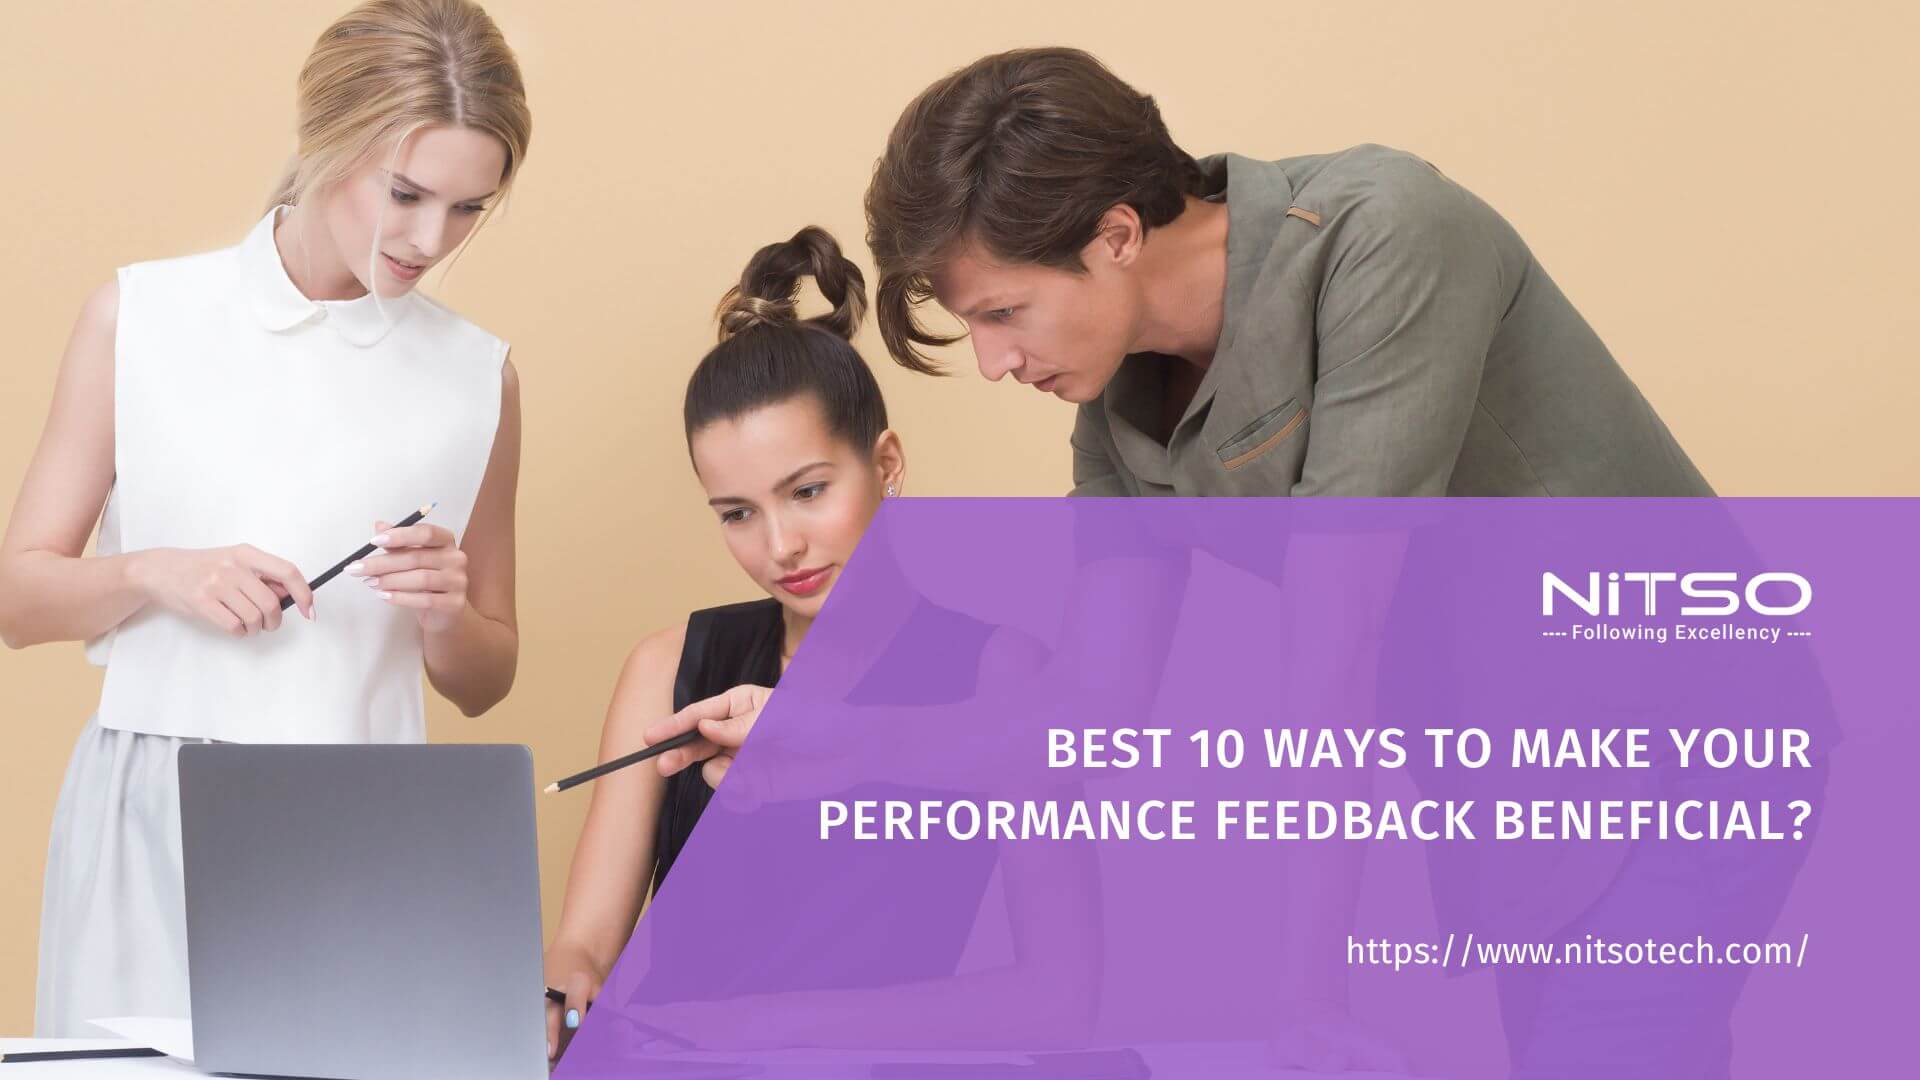 How to Make Your Performance Feedback Beneficial?